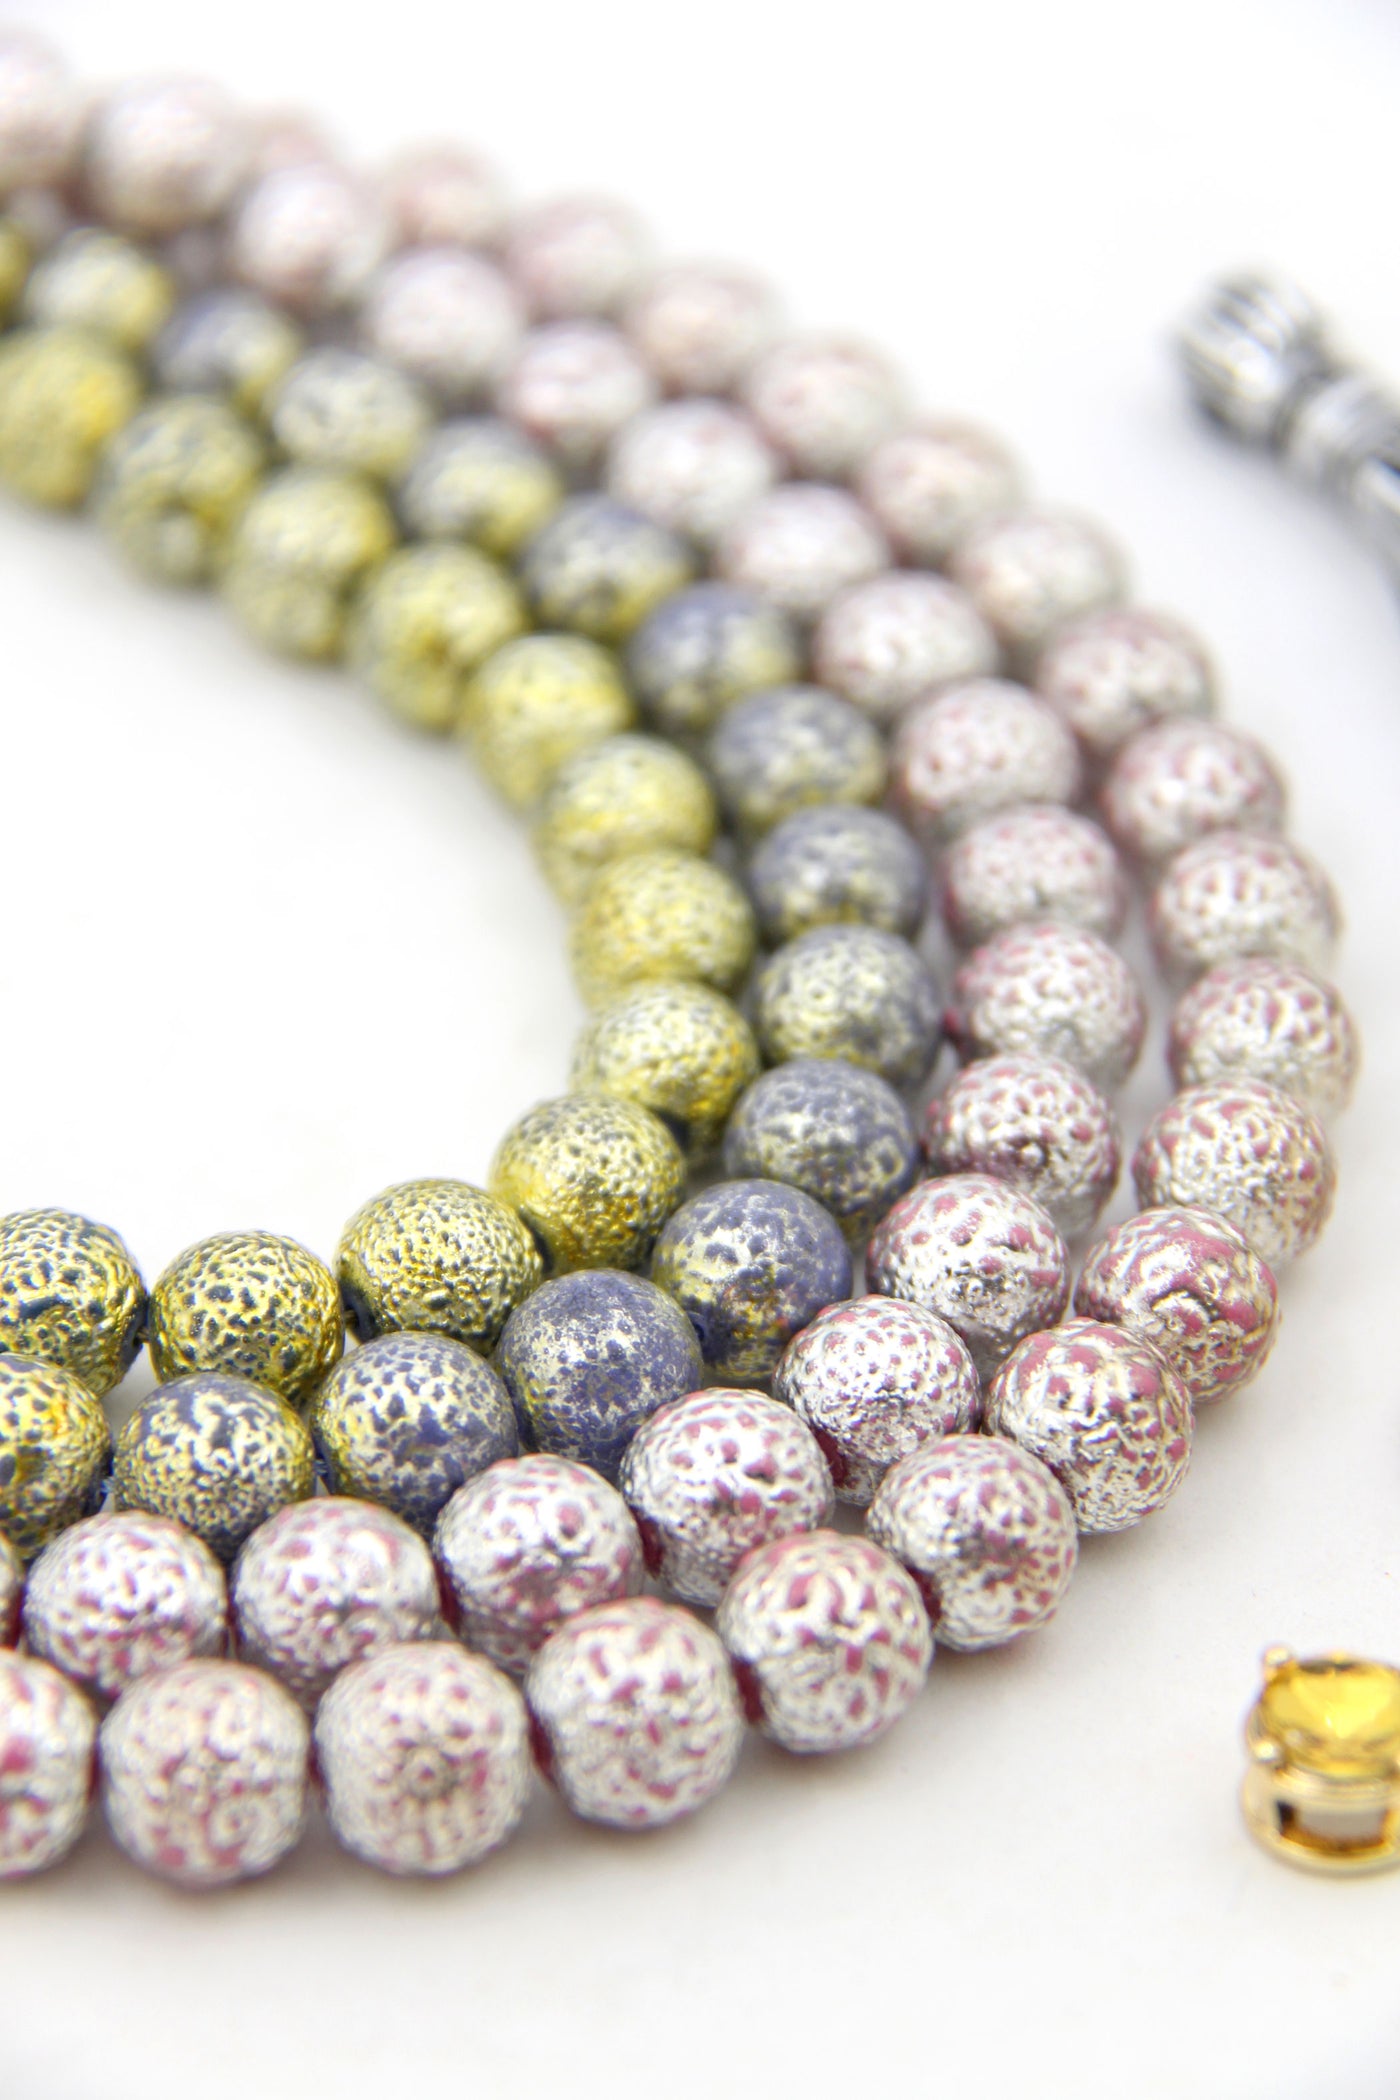 Beads inspired by the new James Webb Space Telescope images, 